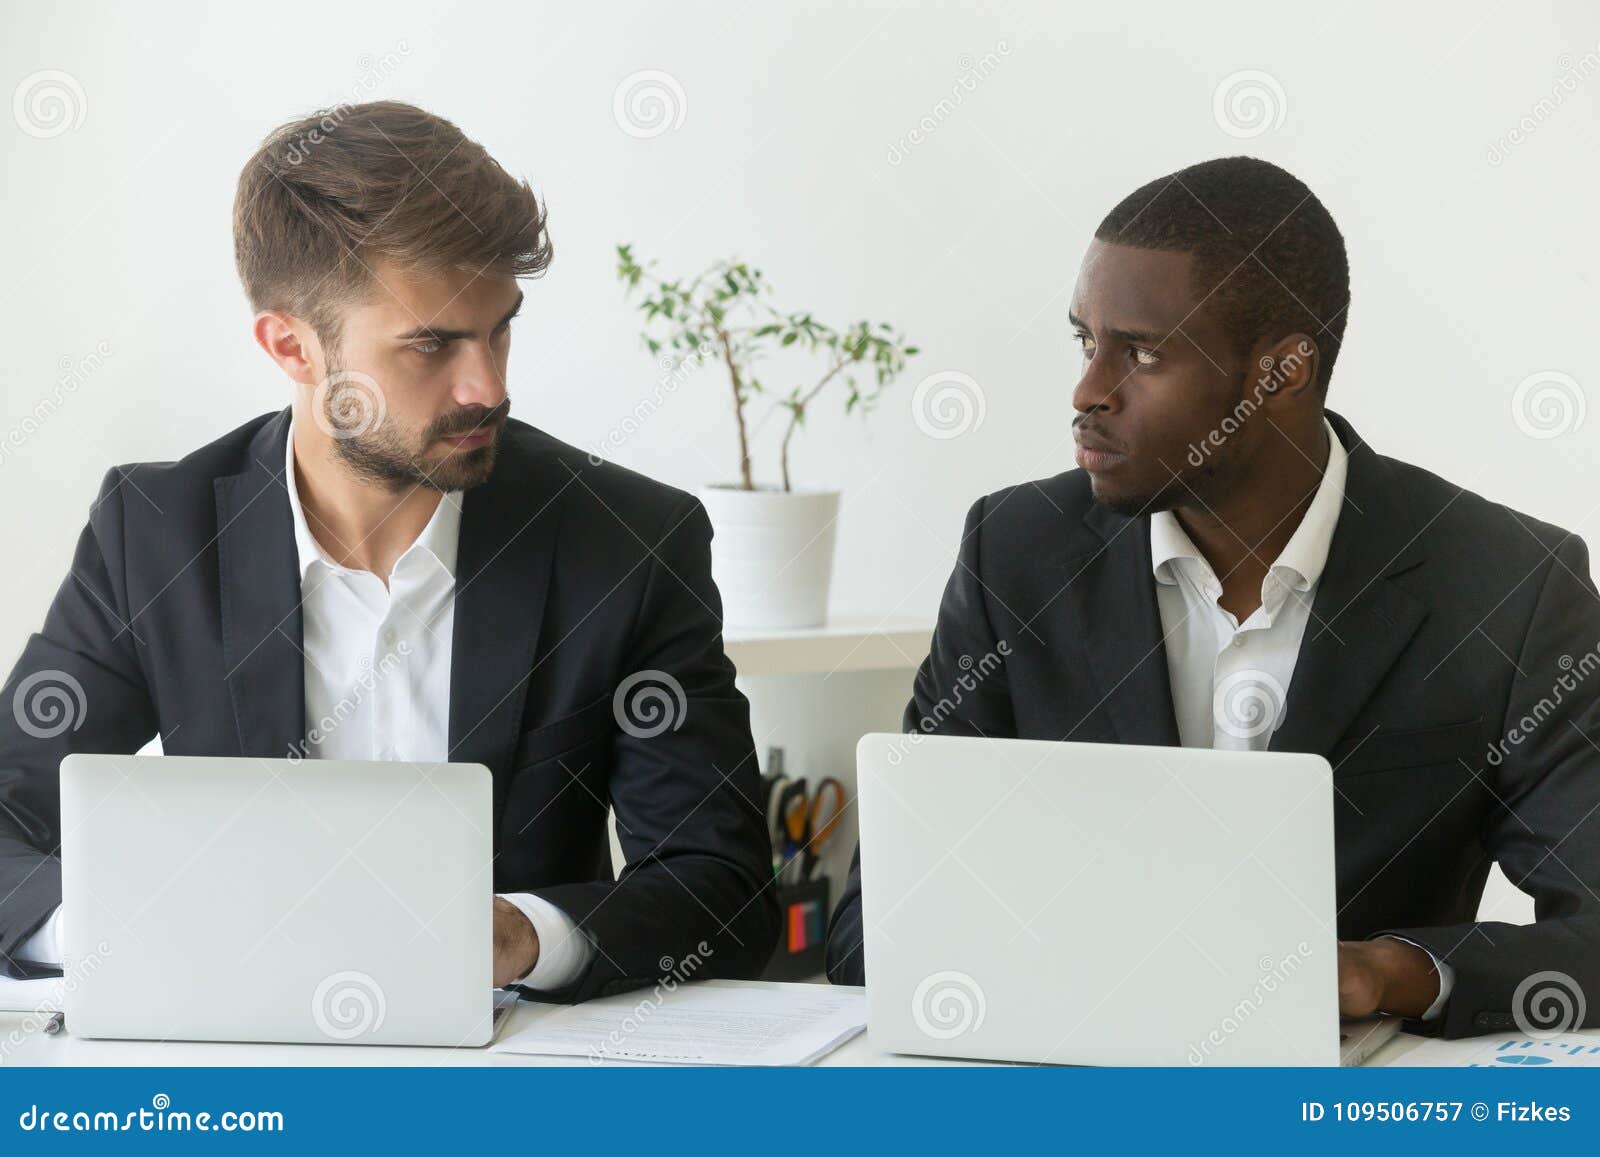 multiracial office rivals looking at each other, rivalry at work